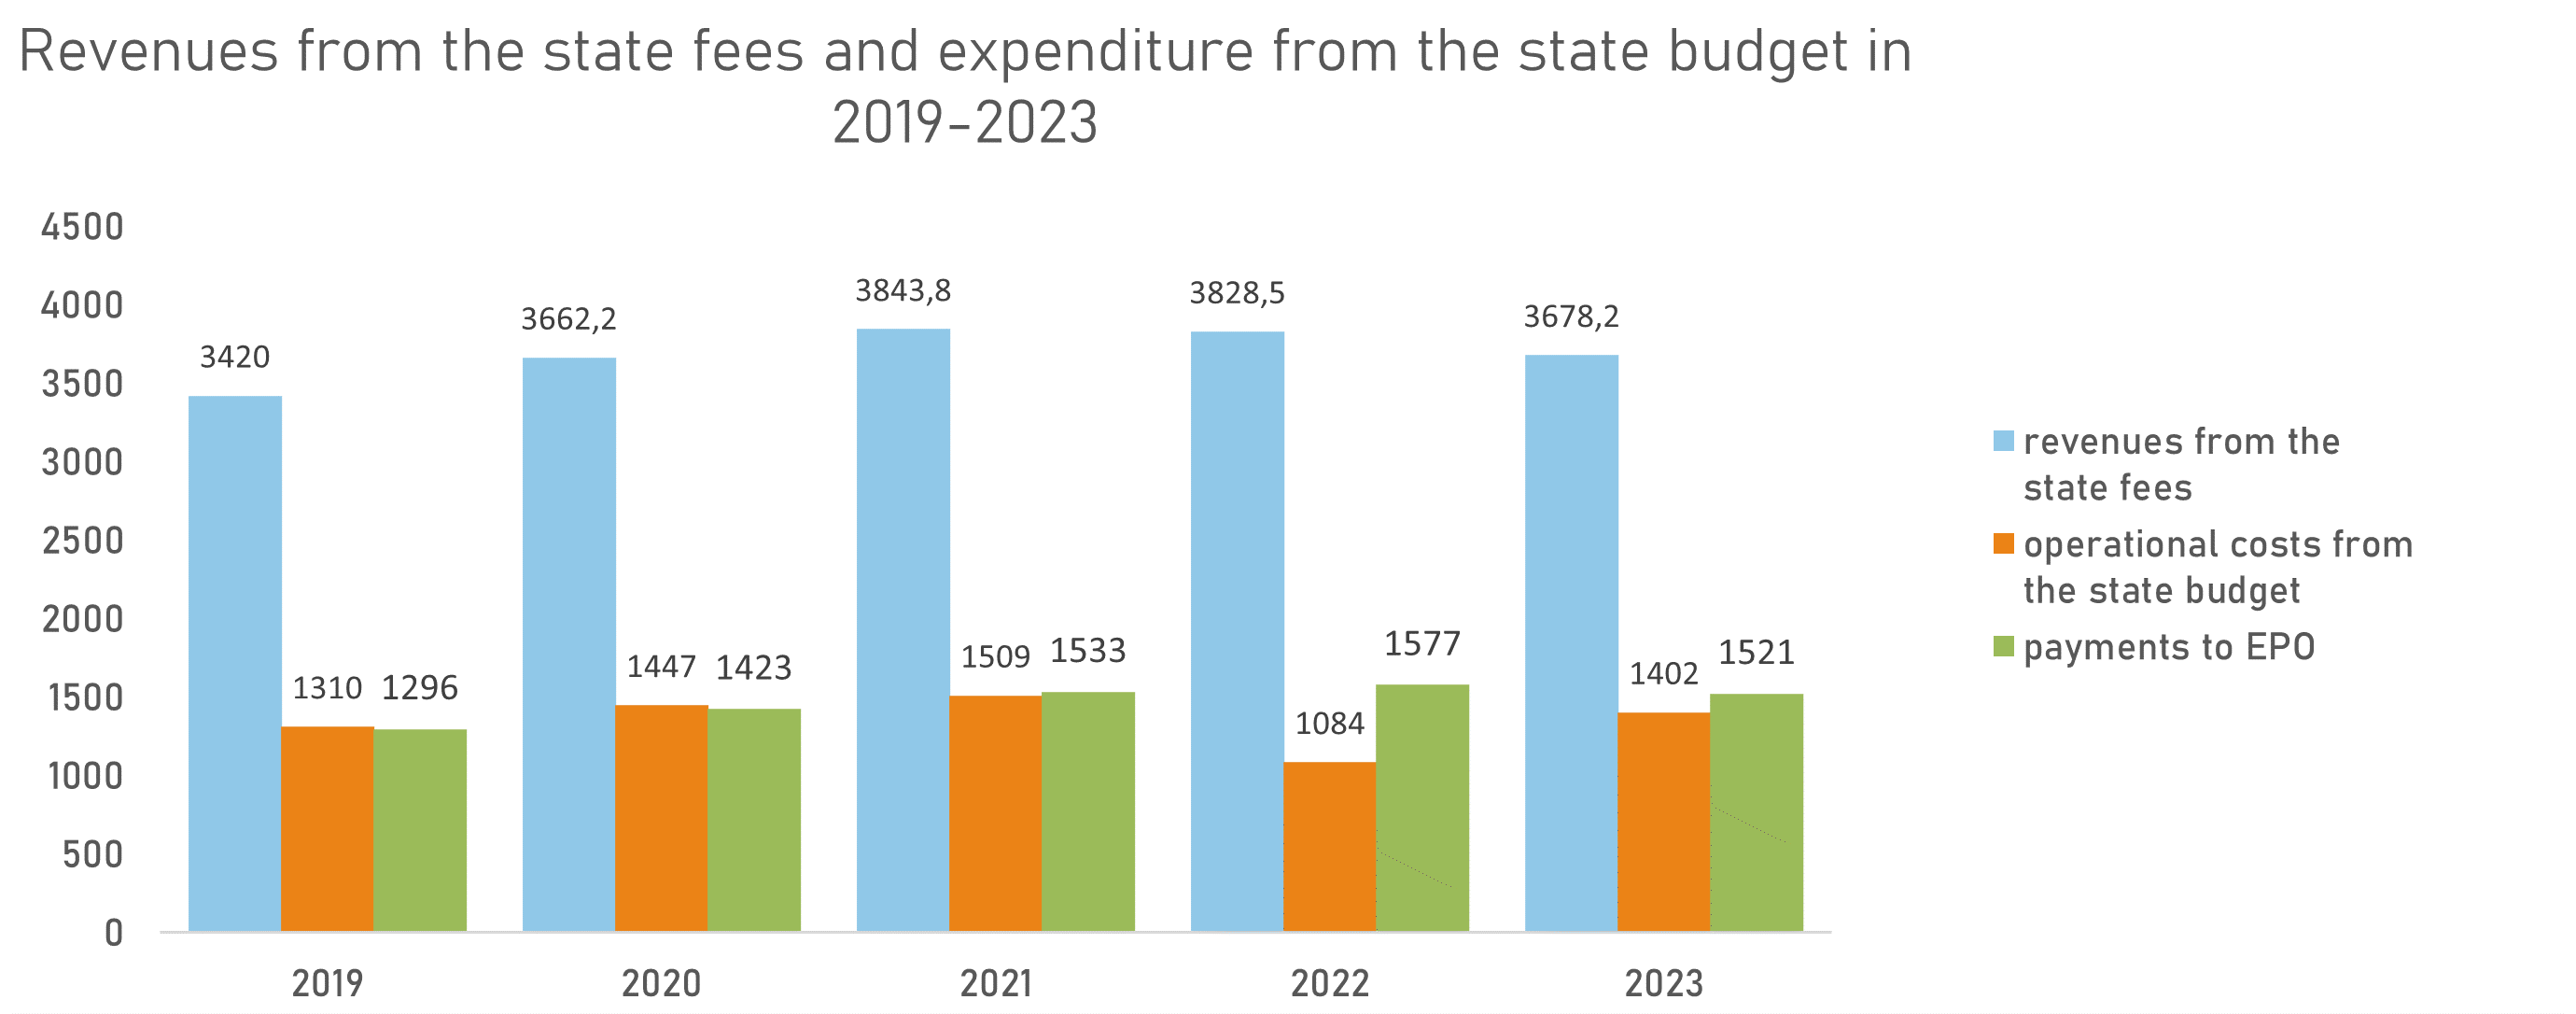 Revenues from the state fees and expenditure from the state budget in 2019-2023